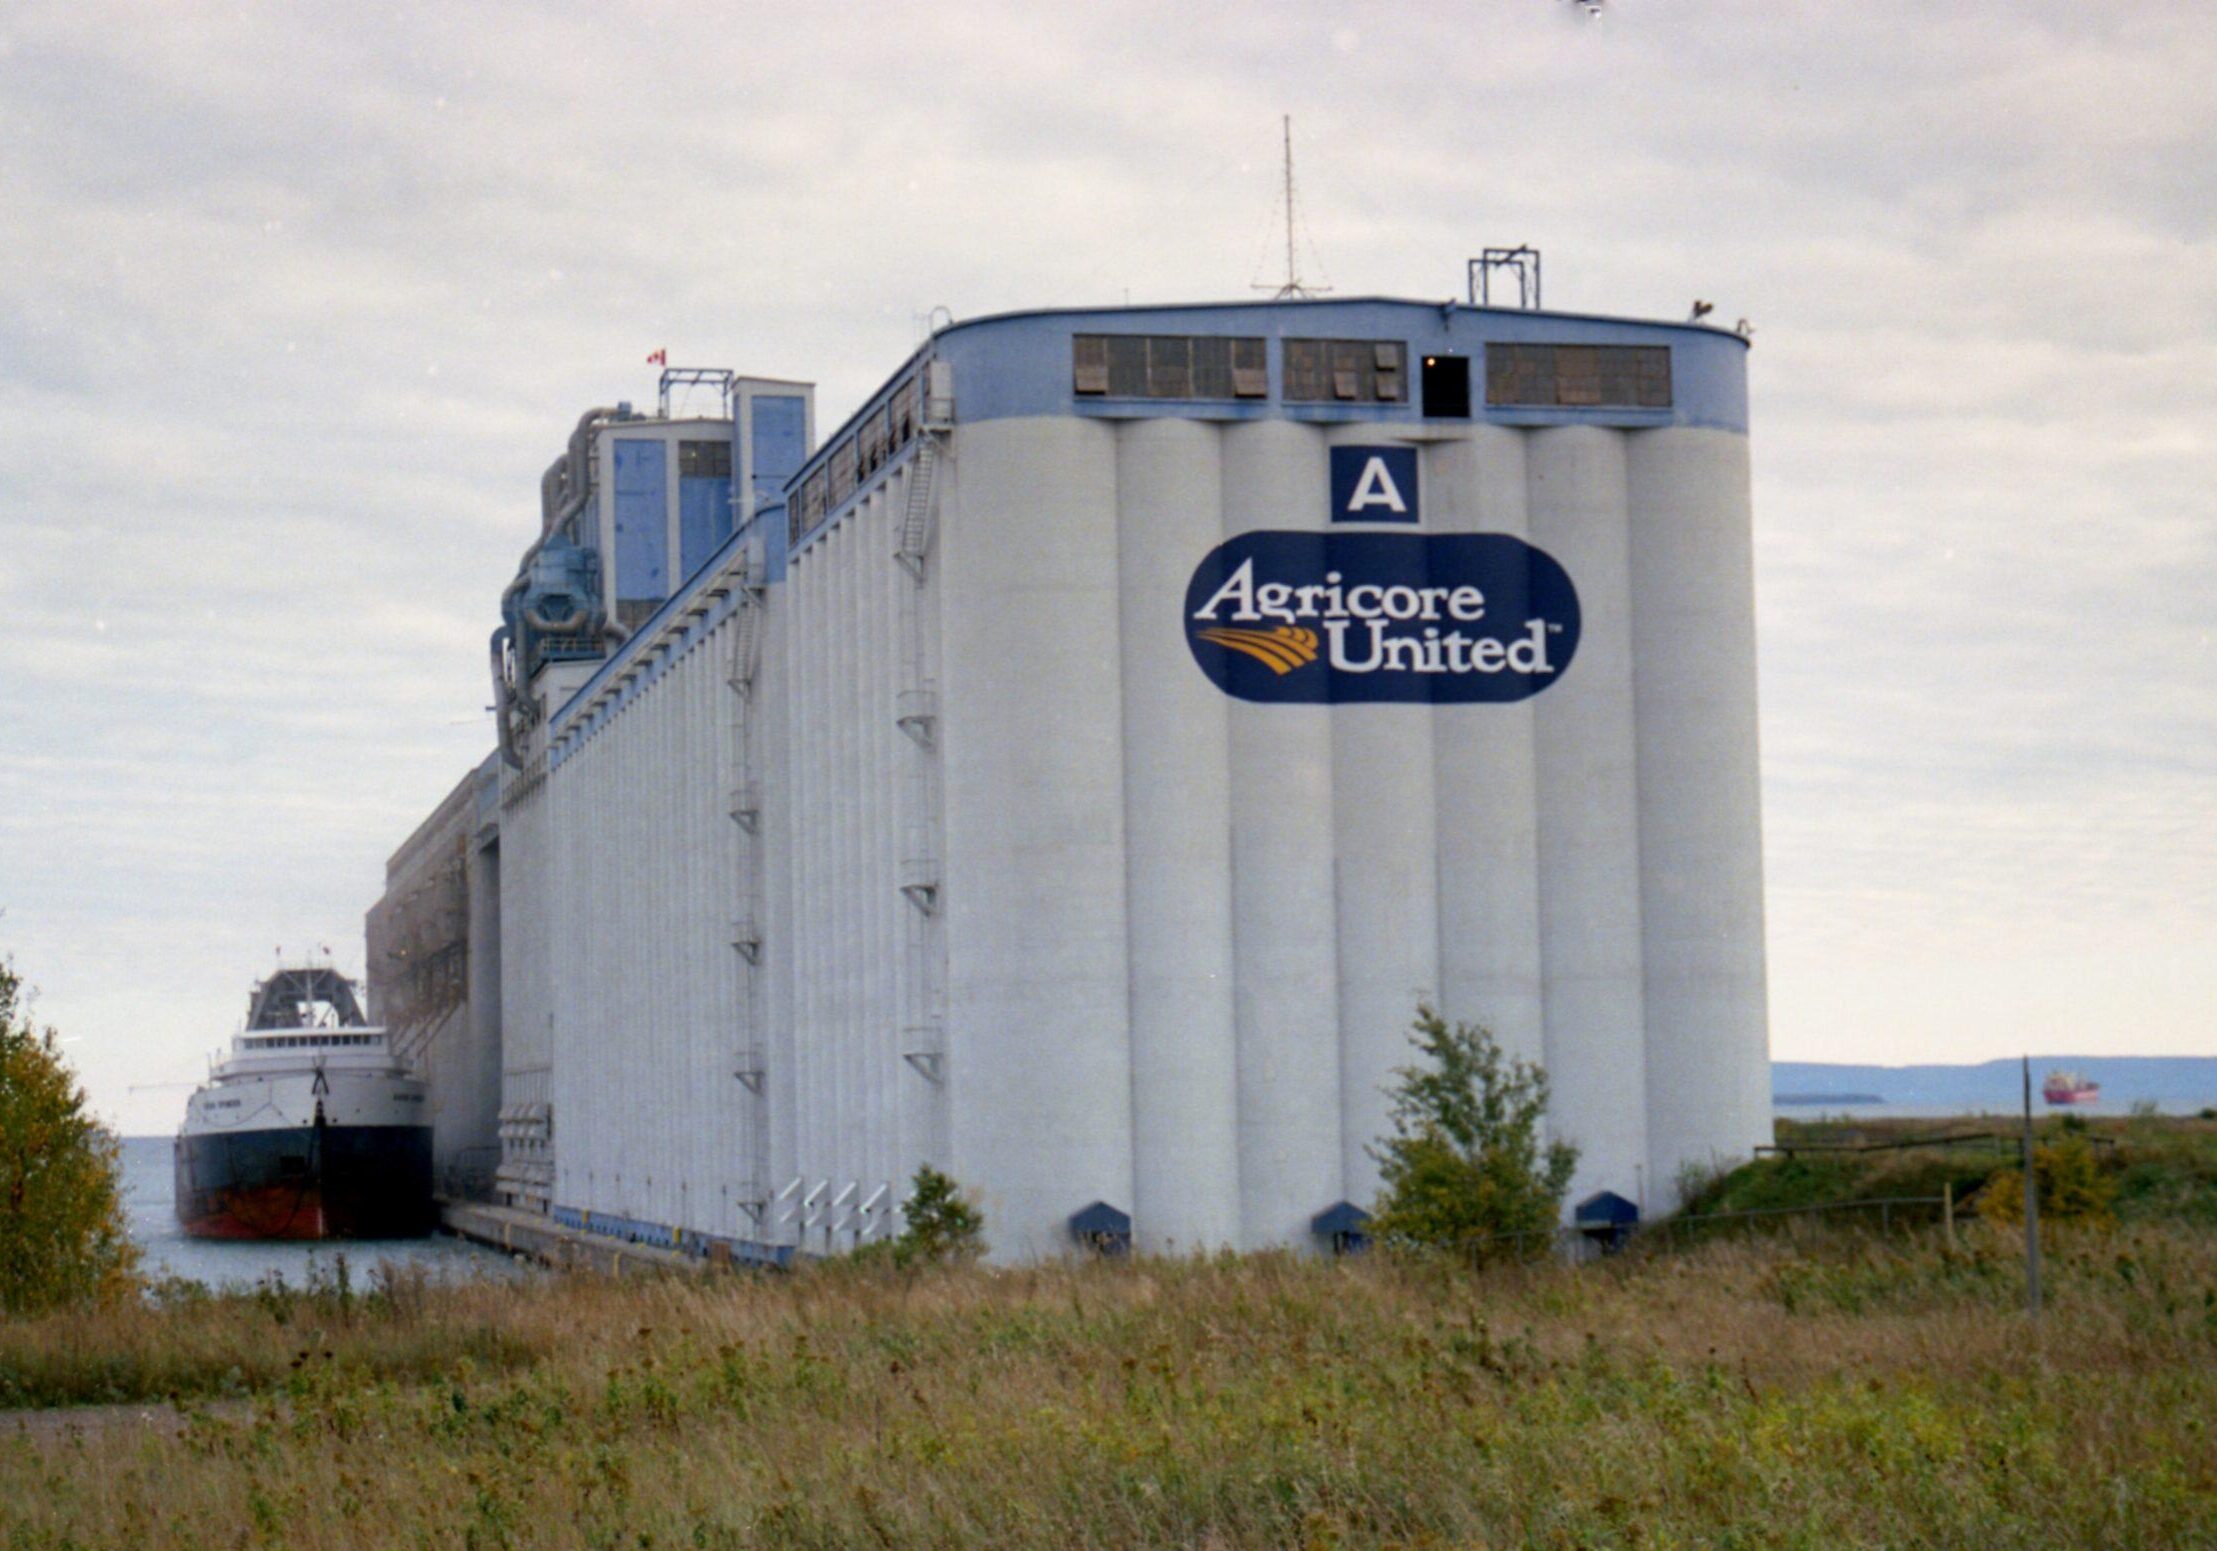 image of back of elevator in the grass with "Agricore United" sign attached